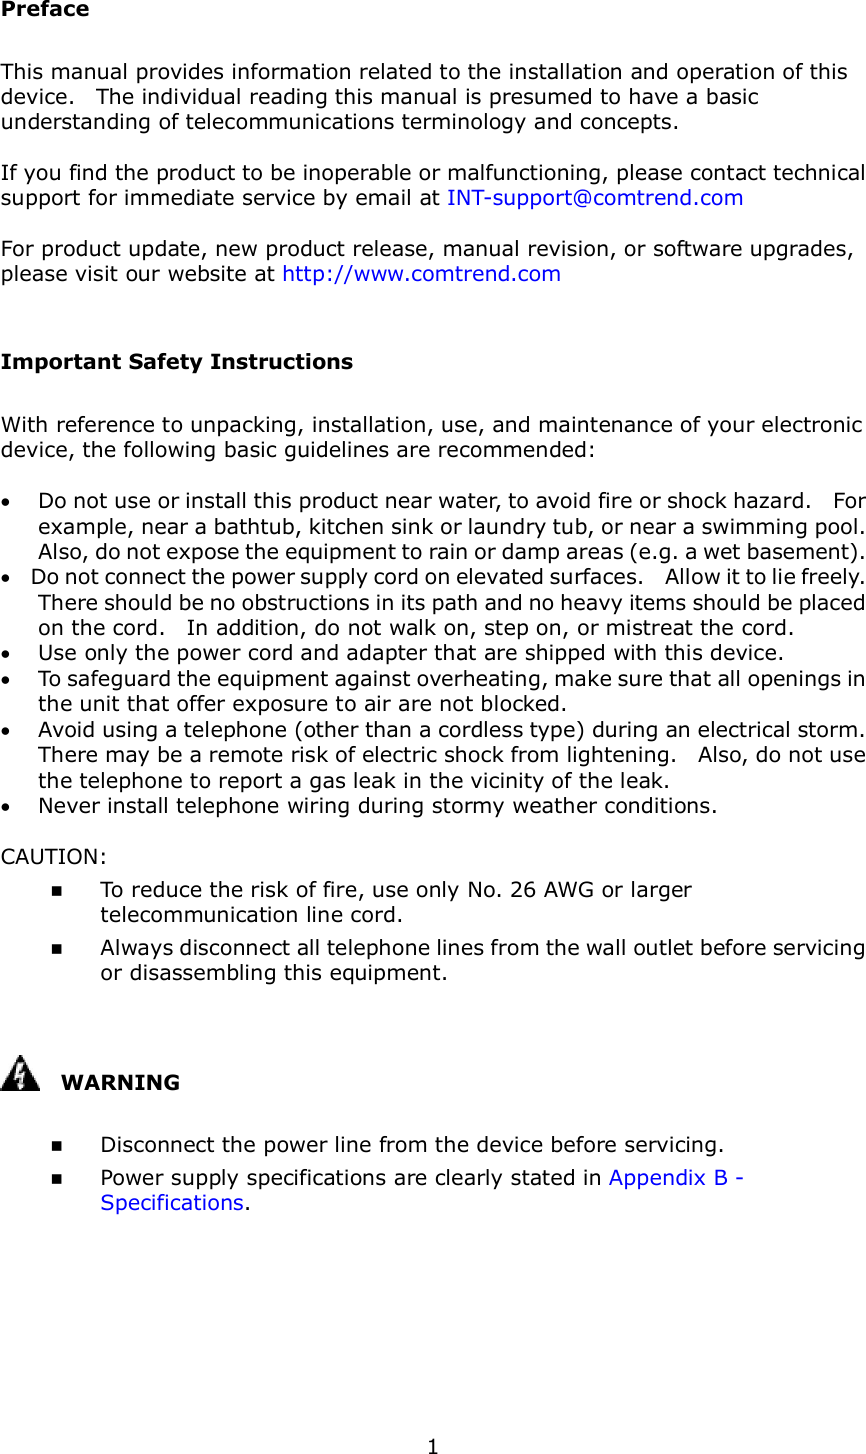  1 Preface This manual provides information related to the installation and operation of this device.    The individual reading this manual is presumed to have a basic understanding of telecommunications terminology and concepts.      If you find the product to be inoperable or malfunctioning, please contact technical support for immediate service by email at INT-support@comtrend.com  For product update, new product release, manual revision, or software upgrades, please visit our website at http://www.comtrend.com  Important Safety Instructions With reference to unpacking, installation, use, and maintenance of your electronic device, the following basic guidelines are recommended:   Do not use or install this product near water, to avoid fire or shock hazard.    For example, near a bathtub, kitchen sink or laundry tub, or near a swimming pool.   Also, do not expose the equipment to rain or damp areas (e.g. a wet basement).  Do not connect the power supply cord on elevated surfaces.    Allow it to lie freely.   There should be no obstructions in its path and no heavy items should be placed on the cord.    In addition, do not walk on, step on, or mistreat the cord.  Use only the power cord and adapter that are shipped with this device.  To safeguard the equipment against overheating, make sure that all openings in the unit that offer exposure to air are not blocked.  Avoid using a telephone (other than a cordless type) during an electrical storm.   There may be a remote risk of electric shock from lightening.    Also, do not use the telephone to report a gas leak in the vicinity of the leak.  Never install telephone wiring during stormy weather conditions.  CAUTION:  To reduce the risk of fire, use only No. 26 AWG or larger telecommunication line cord.  Always disconnect all telephone lines from the wall outlet before servicing or disassembling this equipment.      WARNING  Disconnect the power line from the device before servicing.    Power supply specifications are clearly stated in Appendix B - Specifications.        